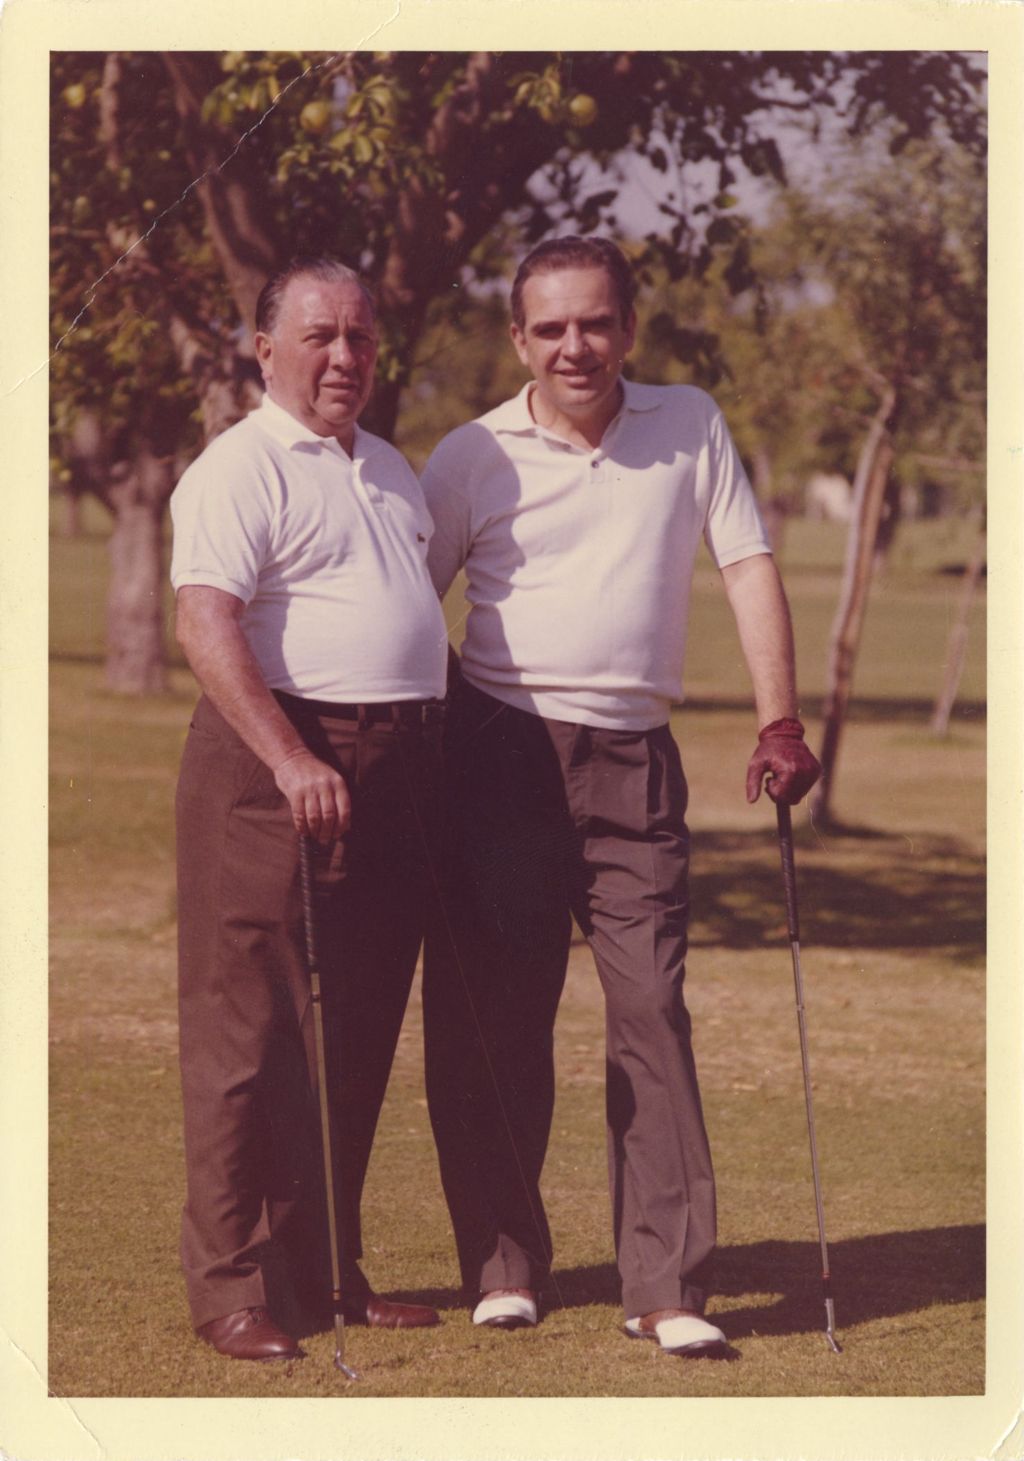 Miniature of Richard J. Daley with a golfing partner